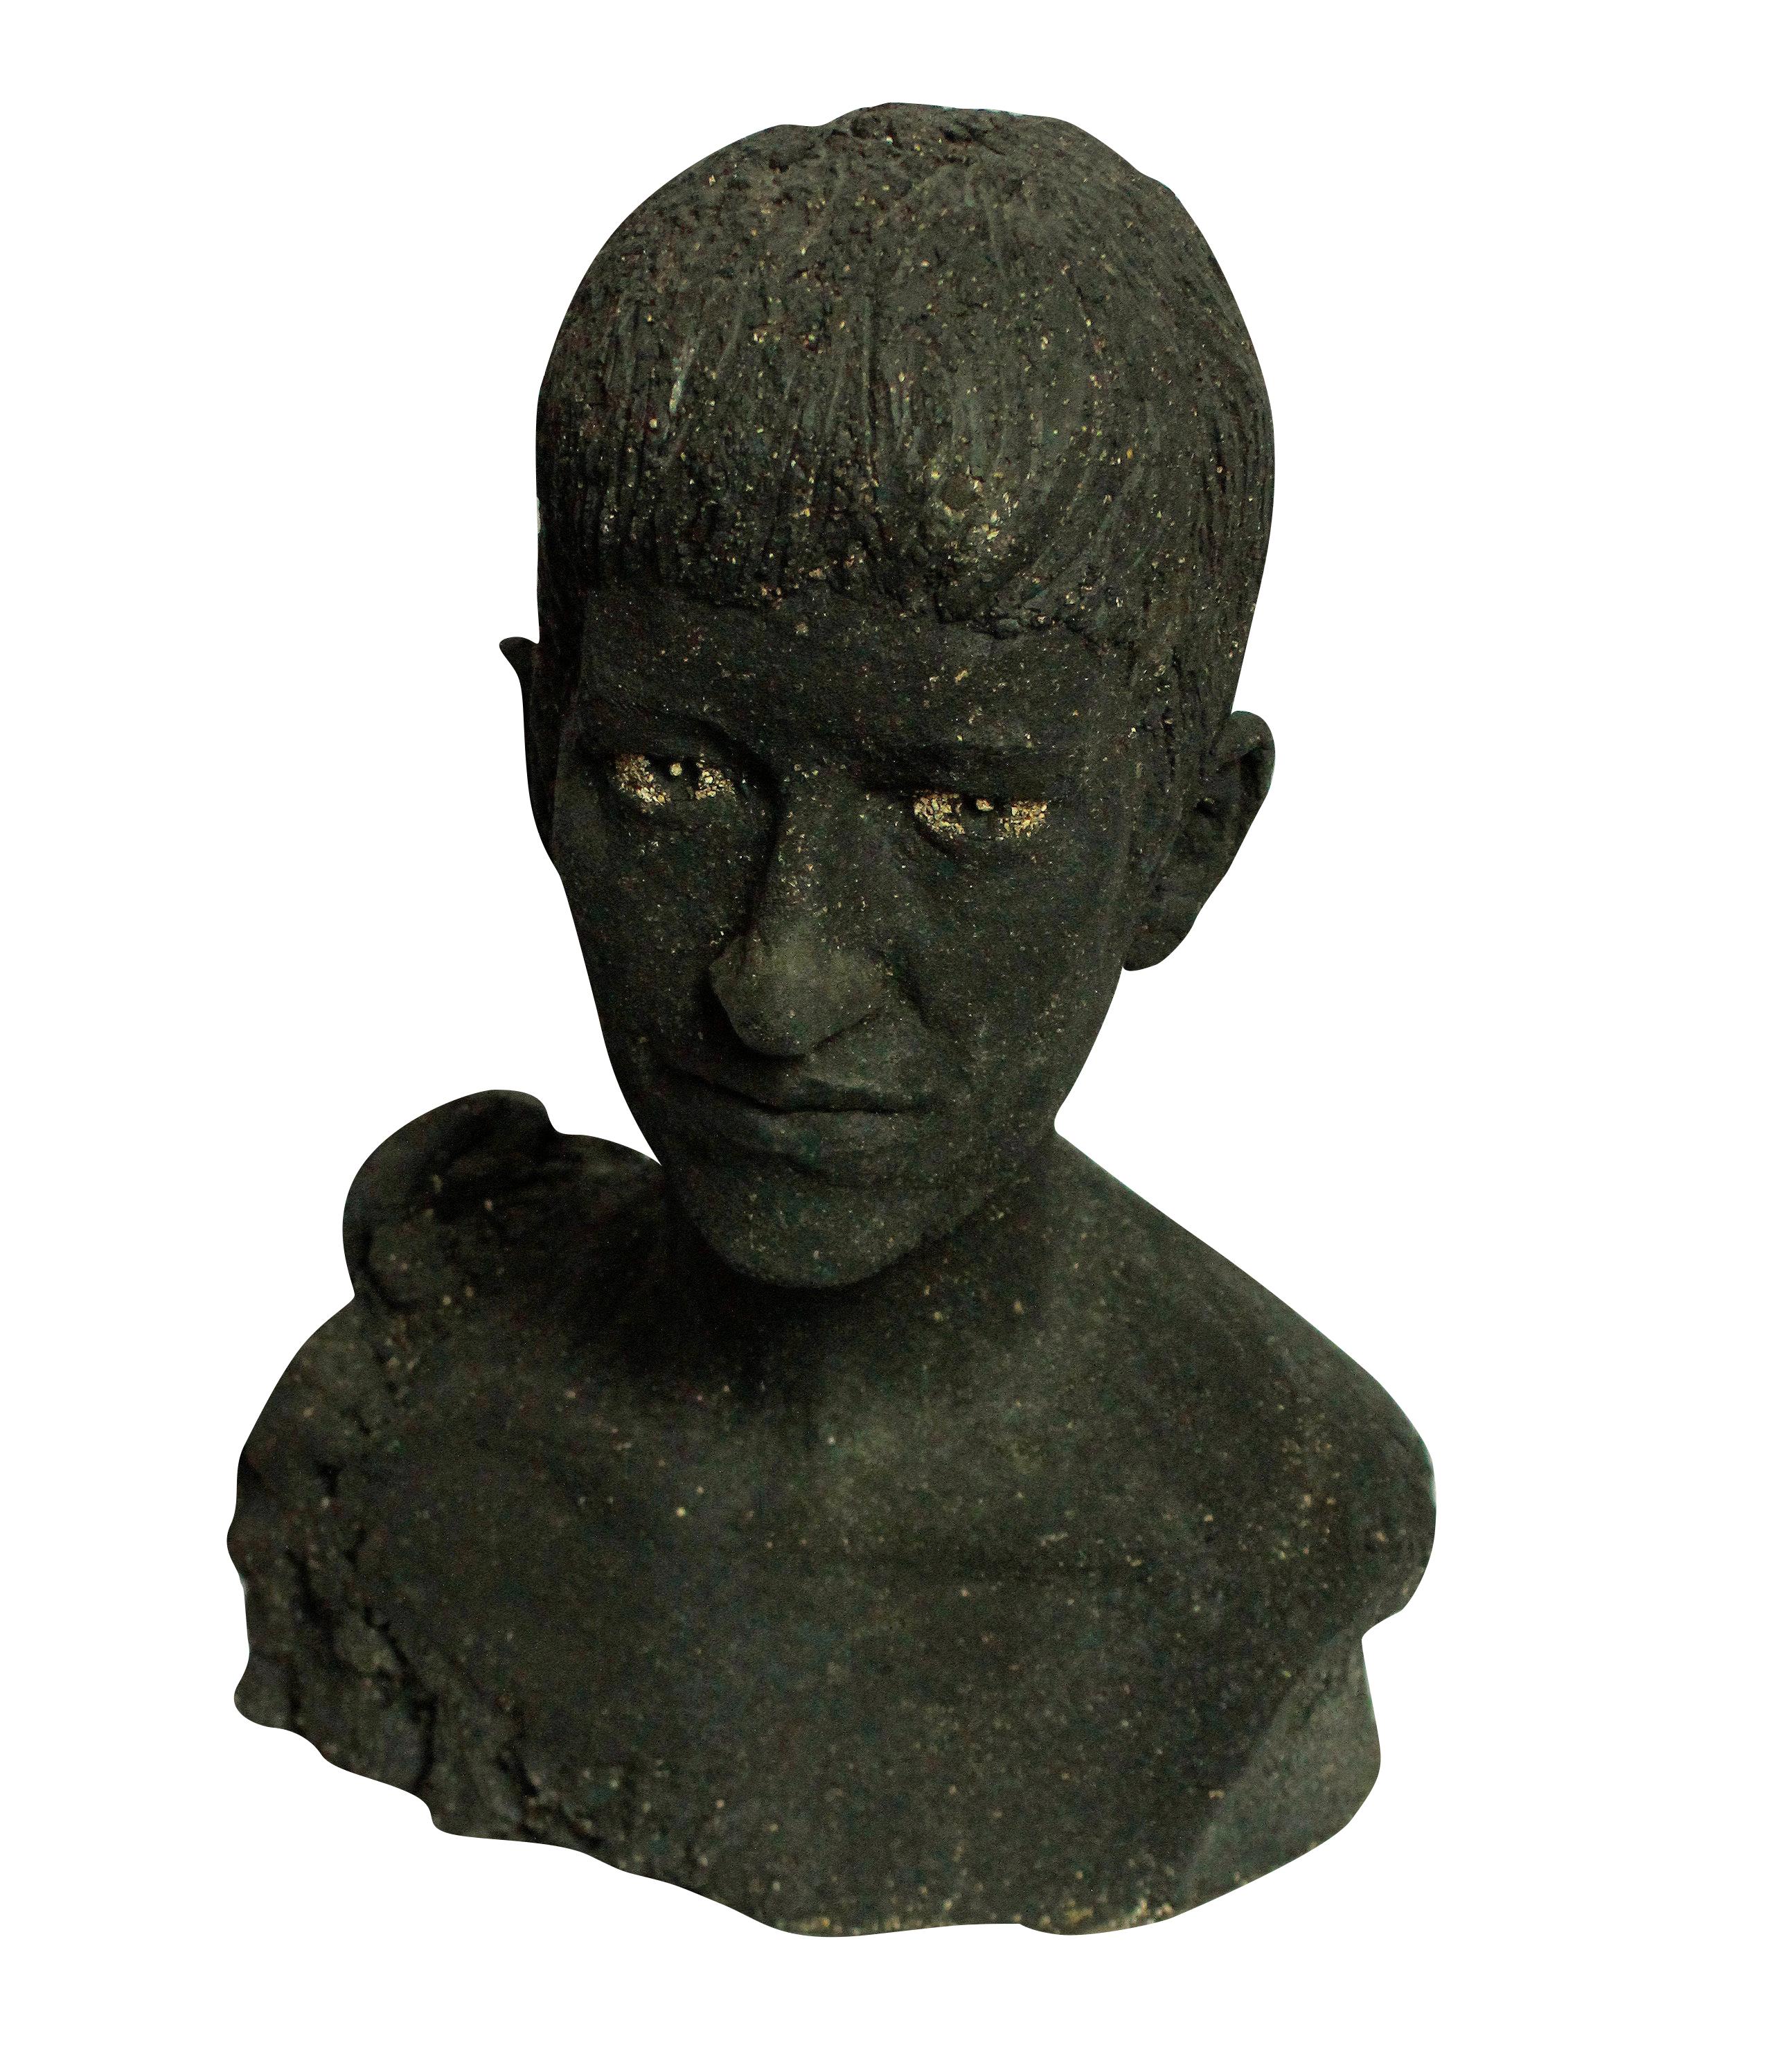 An unusual ceramic study of a Pompeian youth incorporating volcanic ash and material. Very heavy.